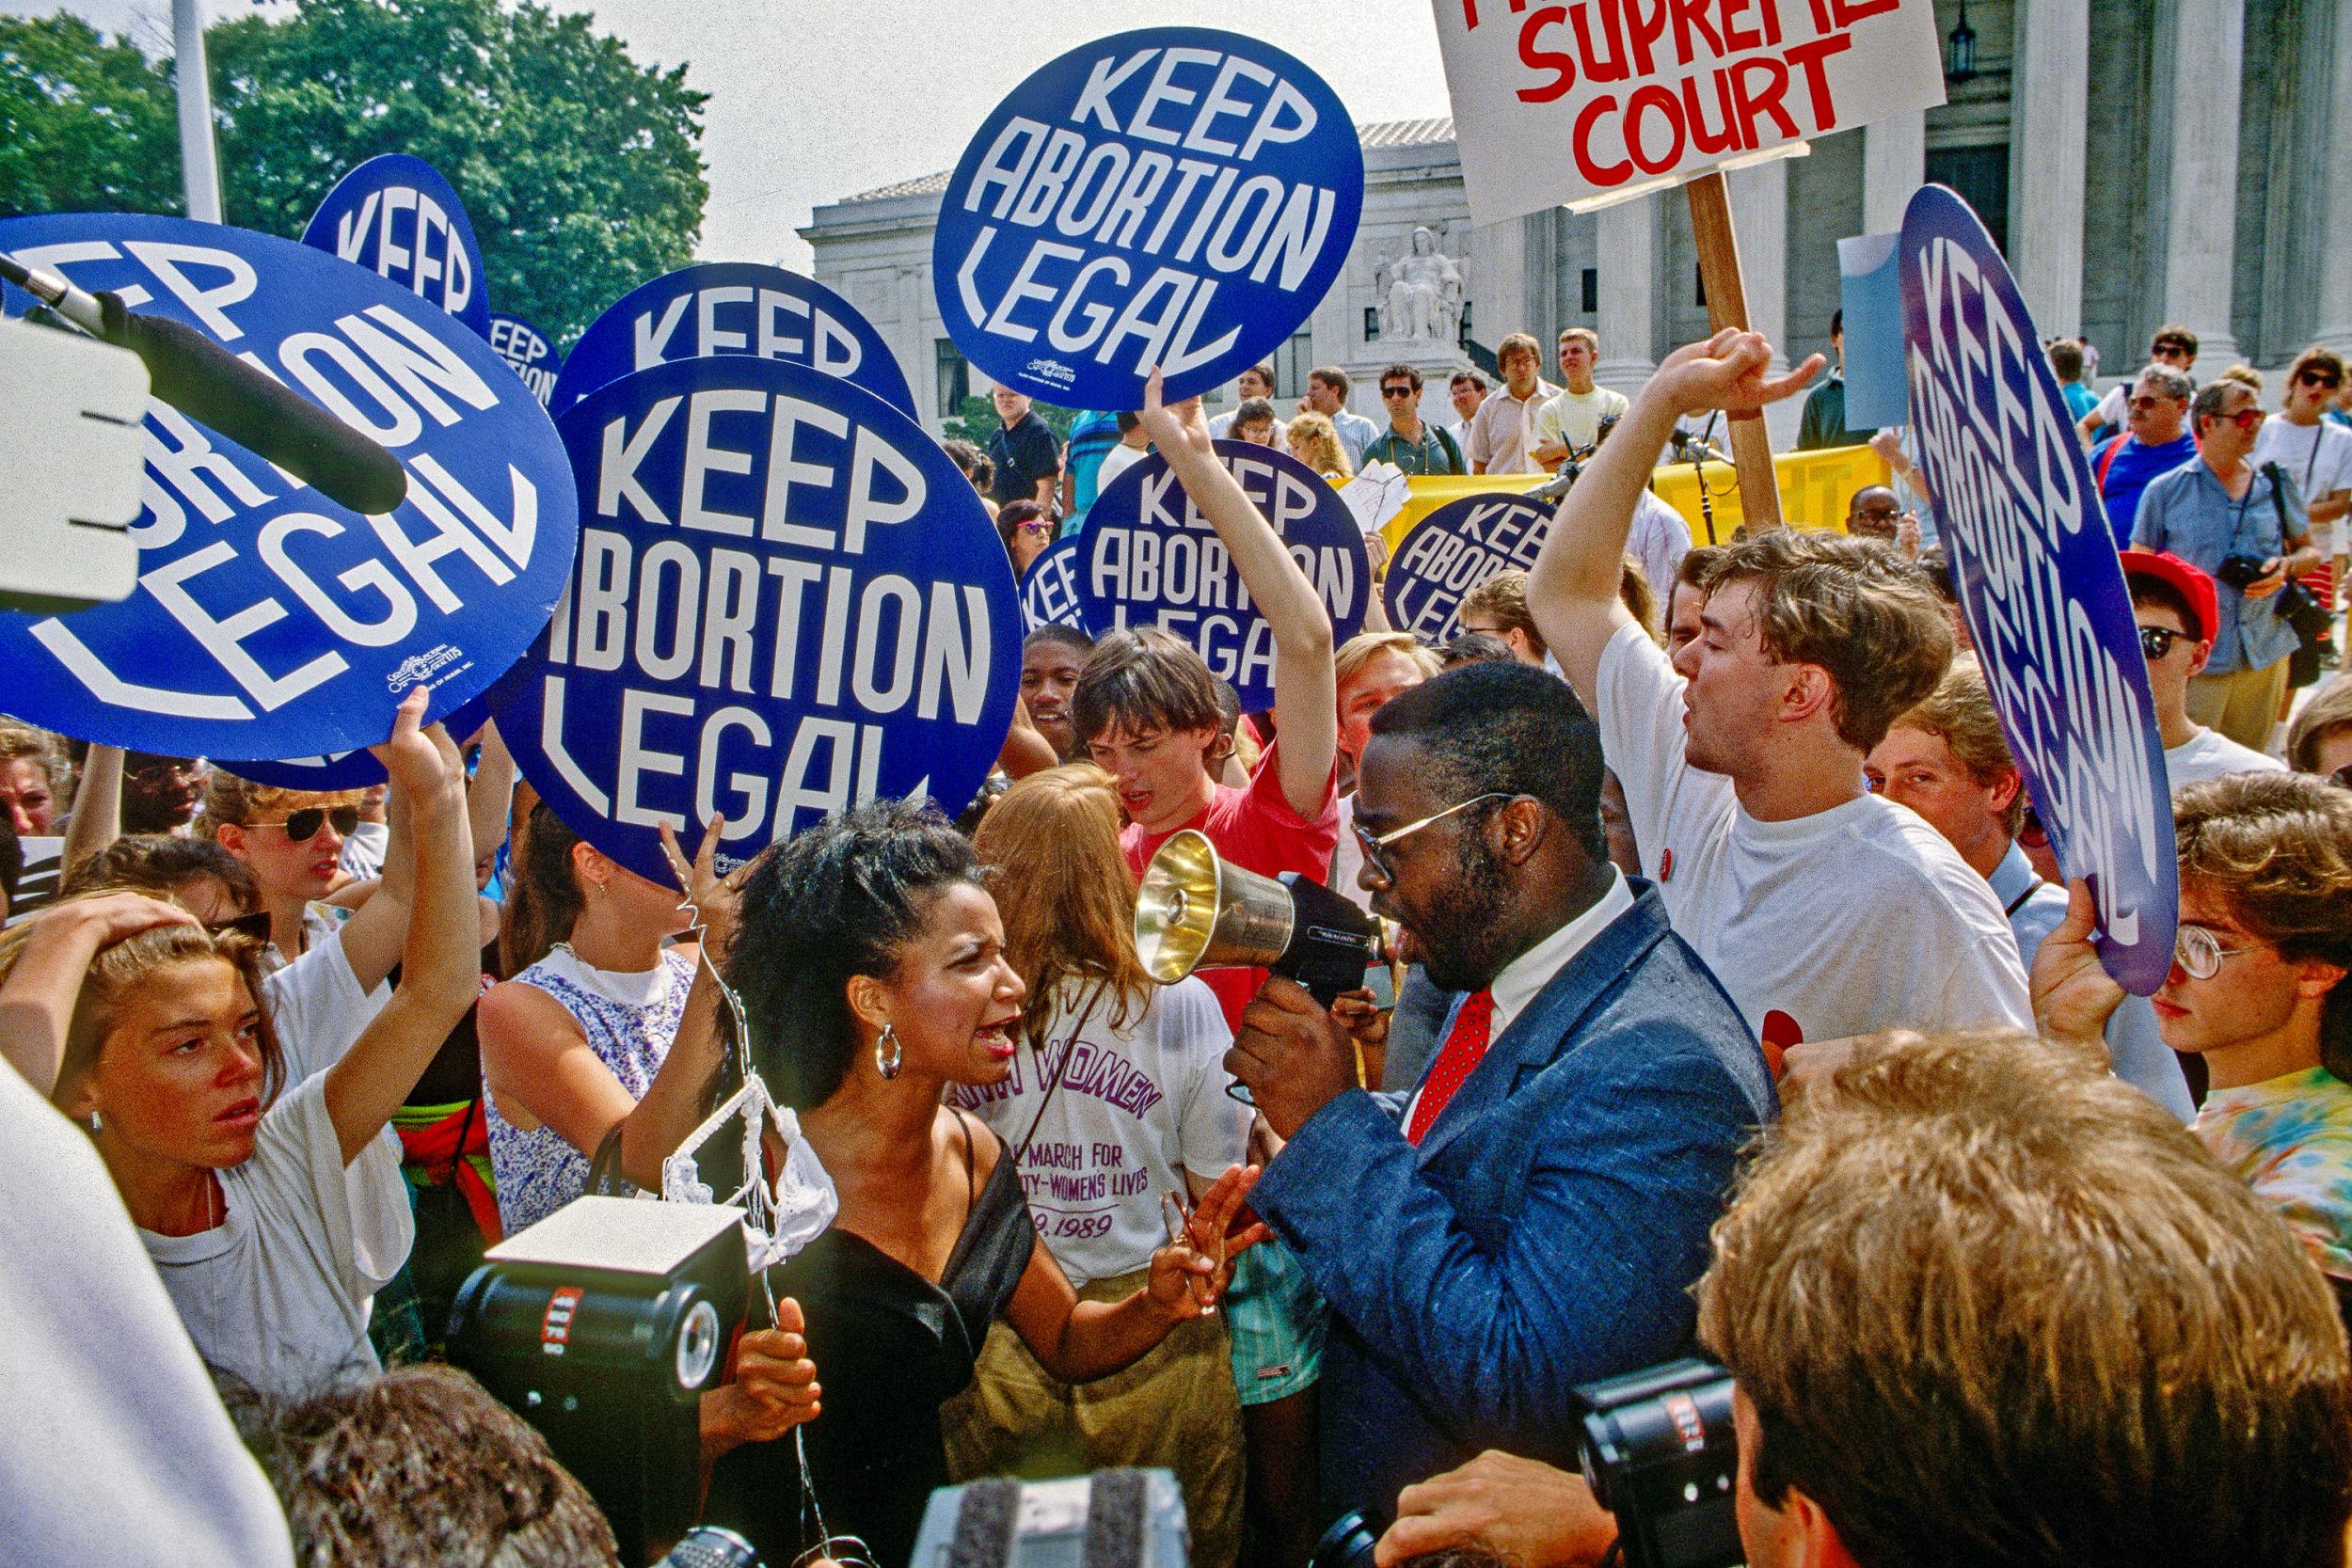 The fight to retain the right to legal abortion has continued for many years